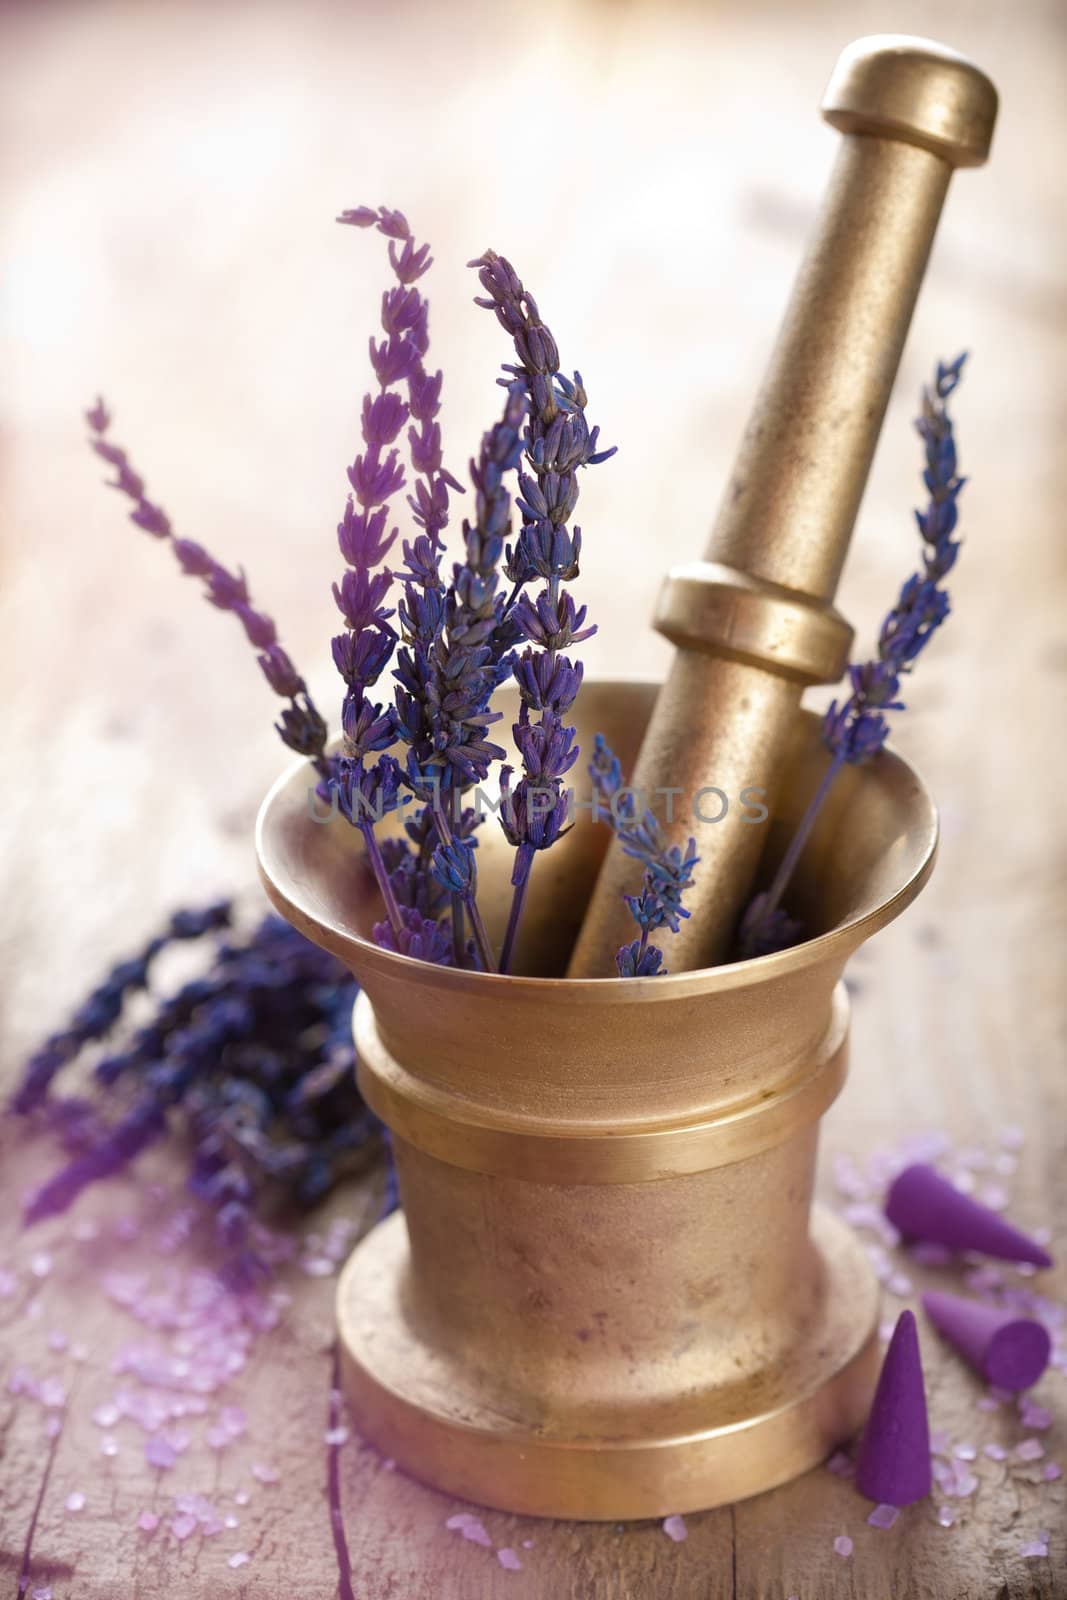 mortar with lavender